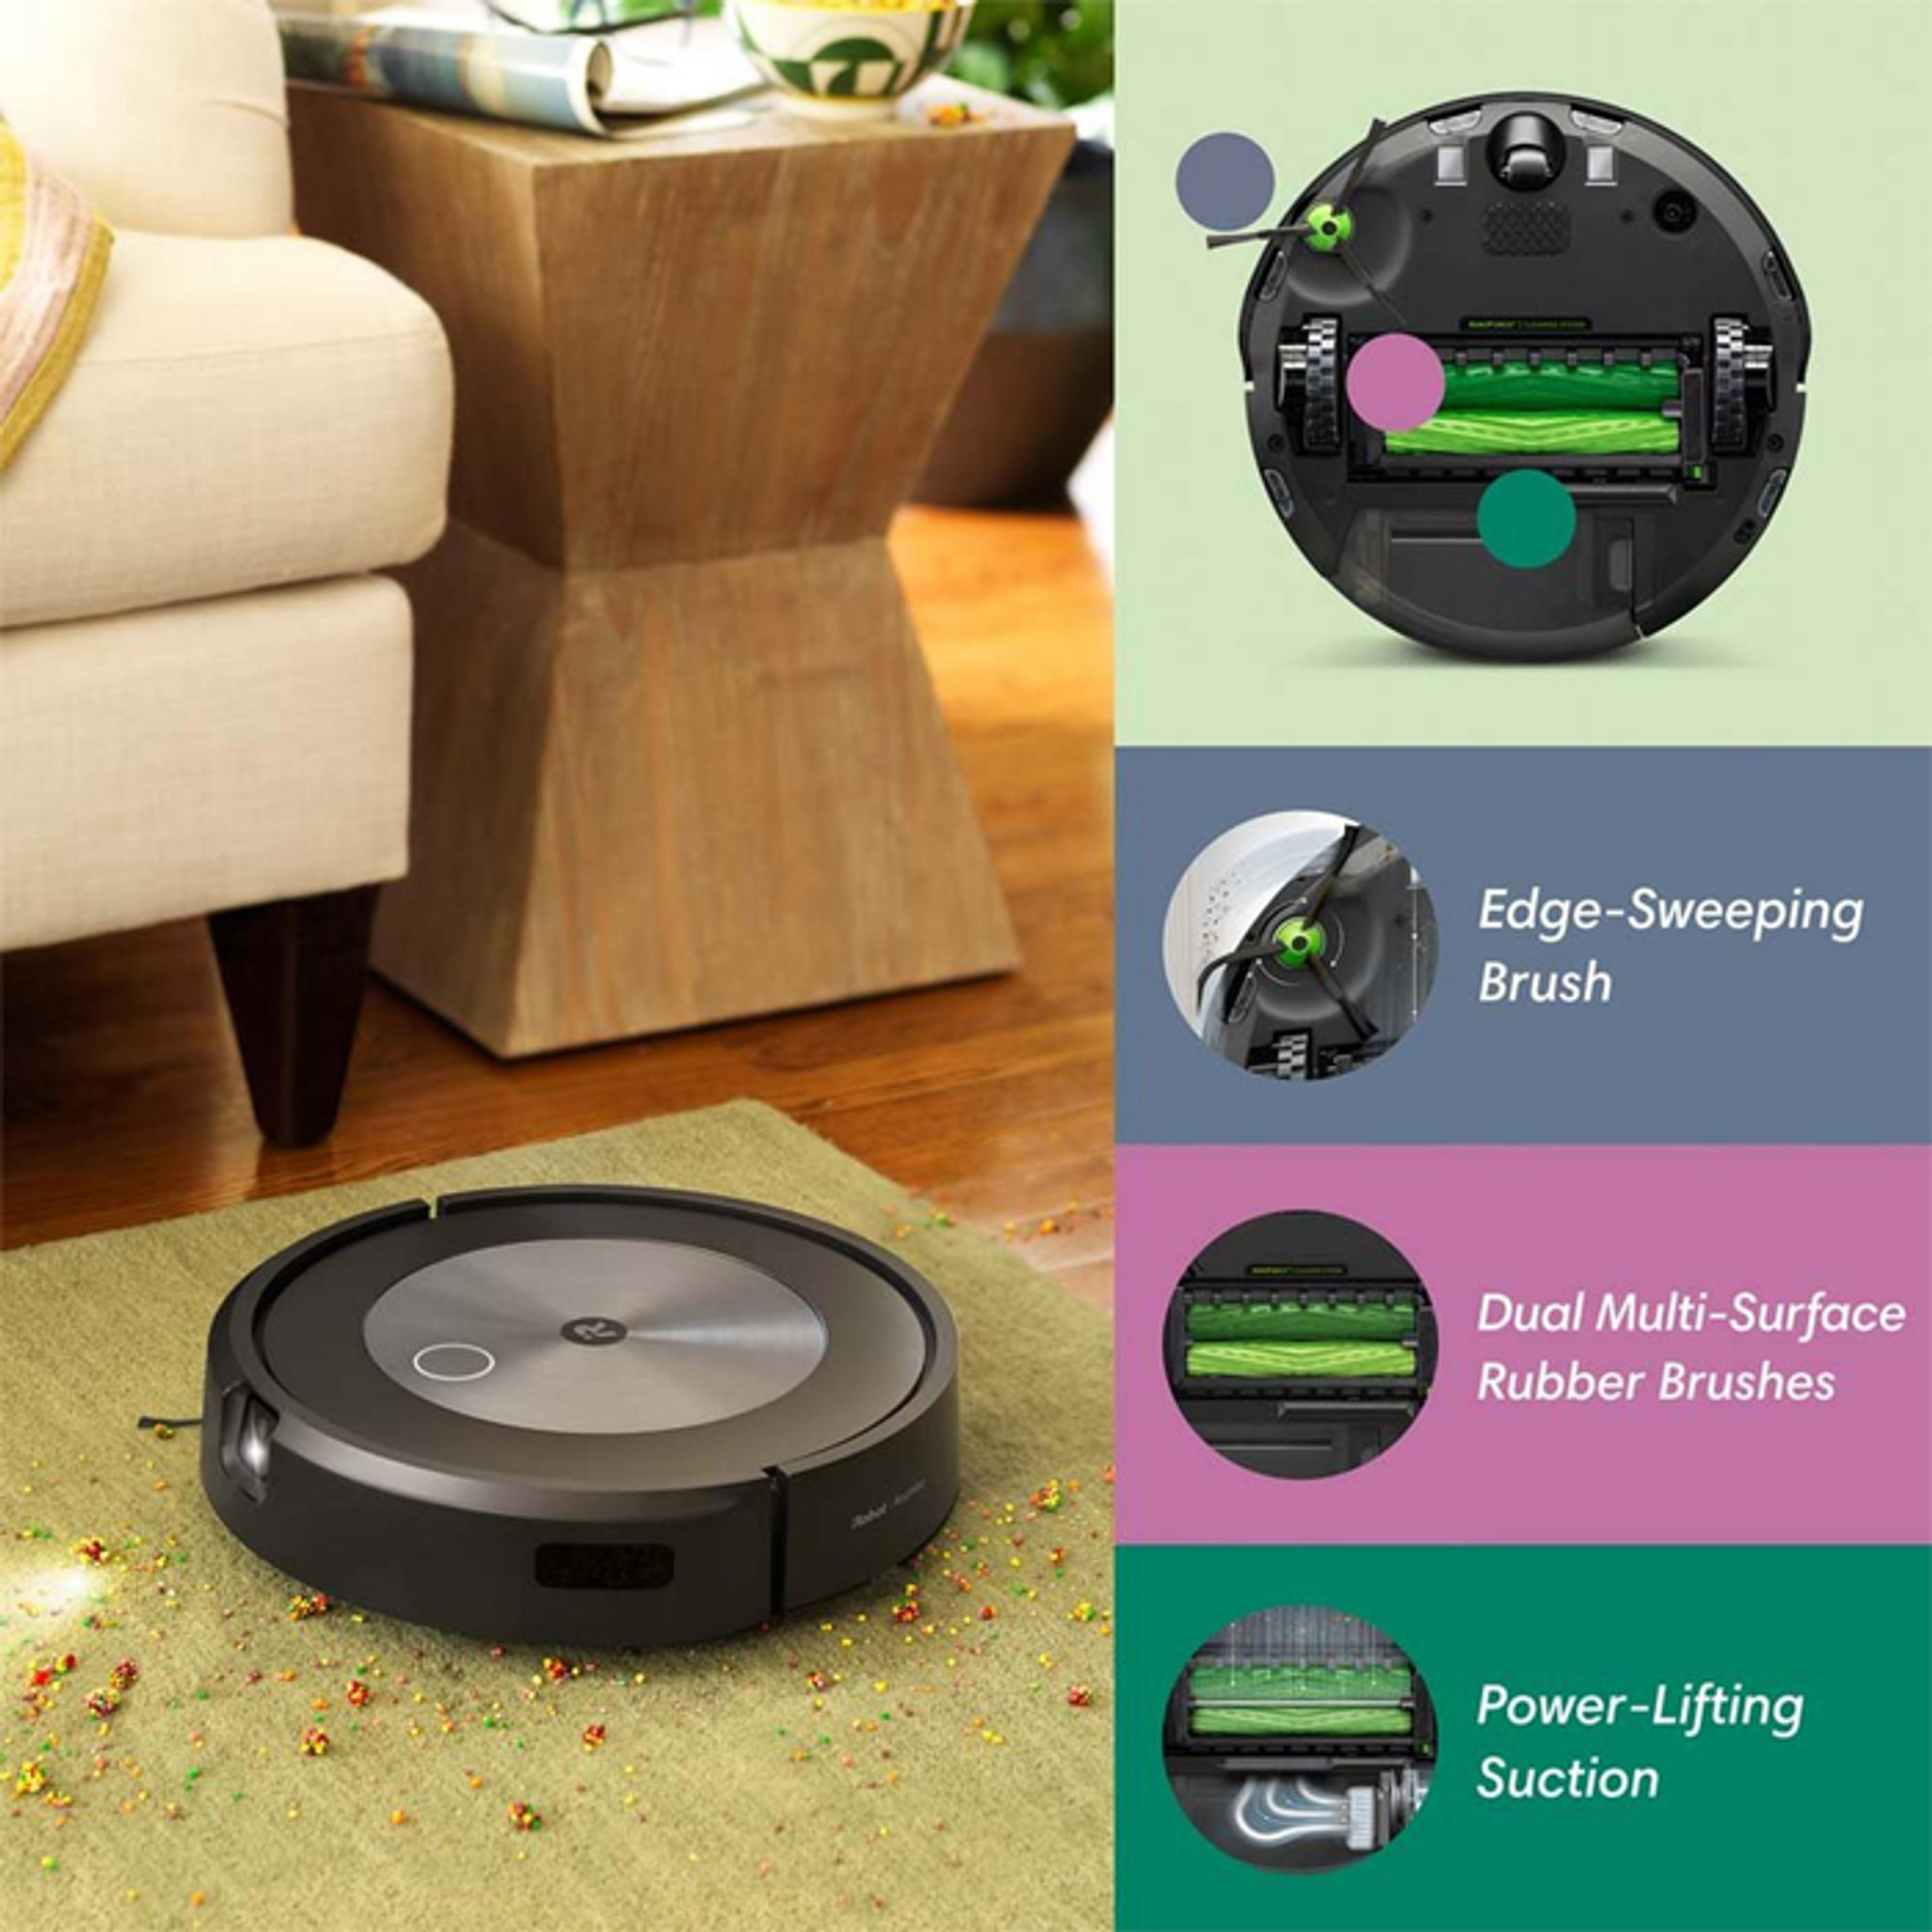 Buy Roomba j7+ Robot Vacuum with Automatic Dirt Disposal by iRobot from  Canada at